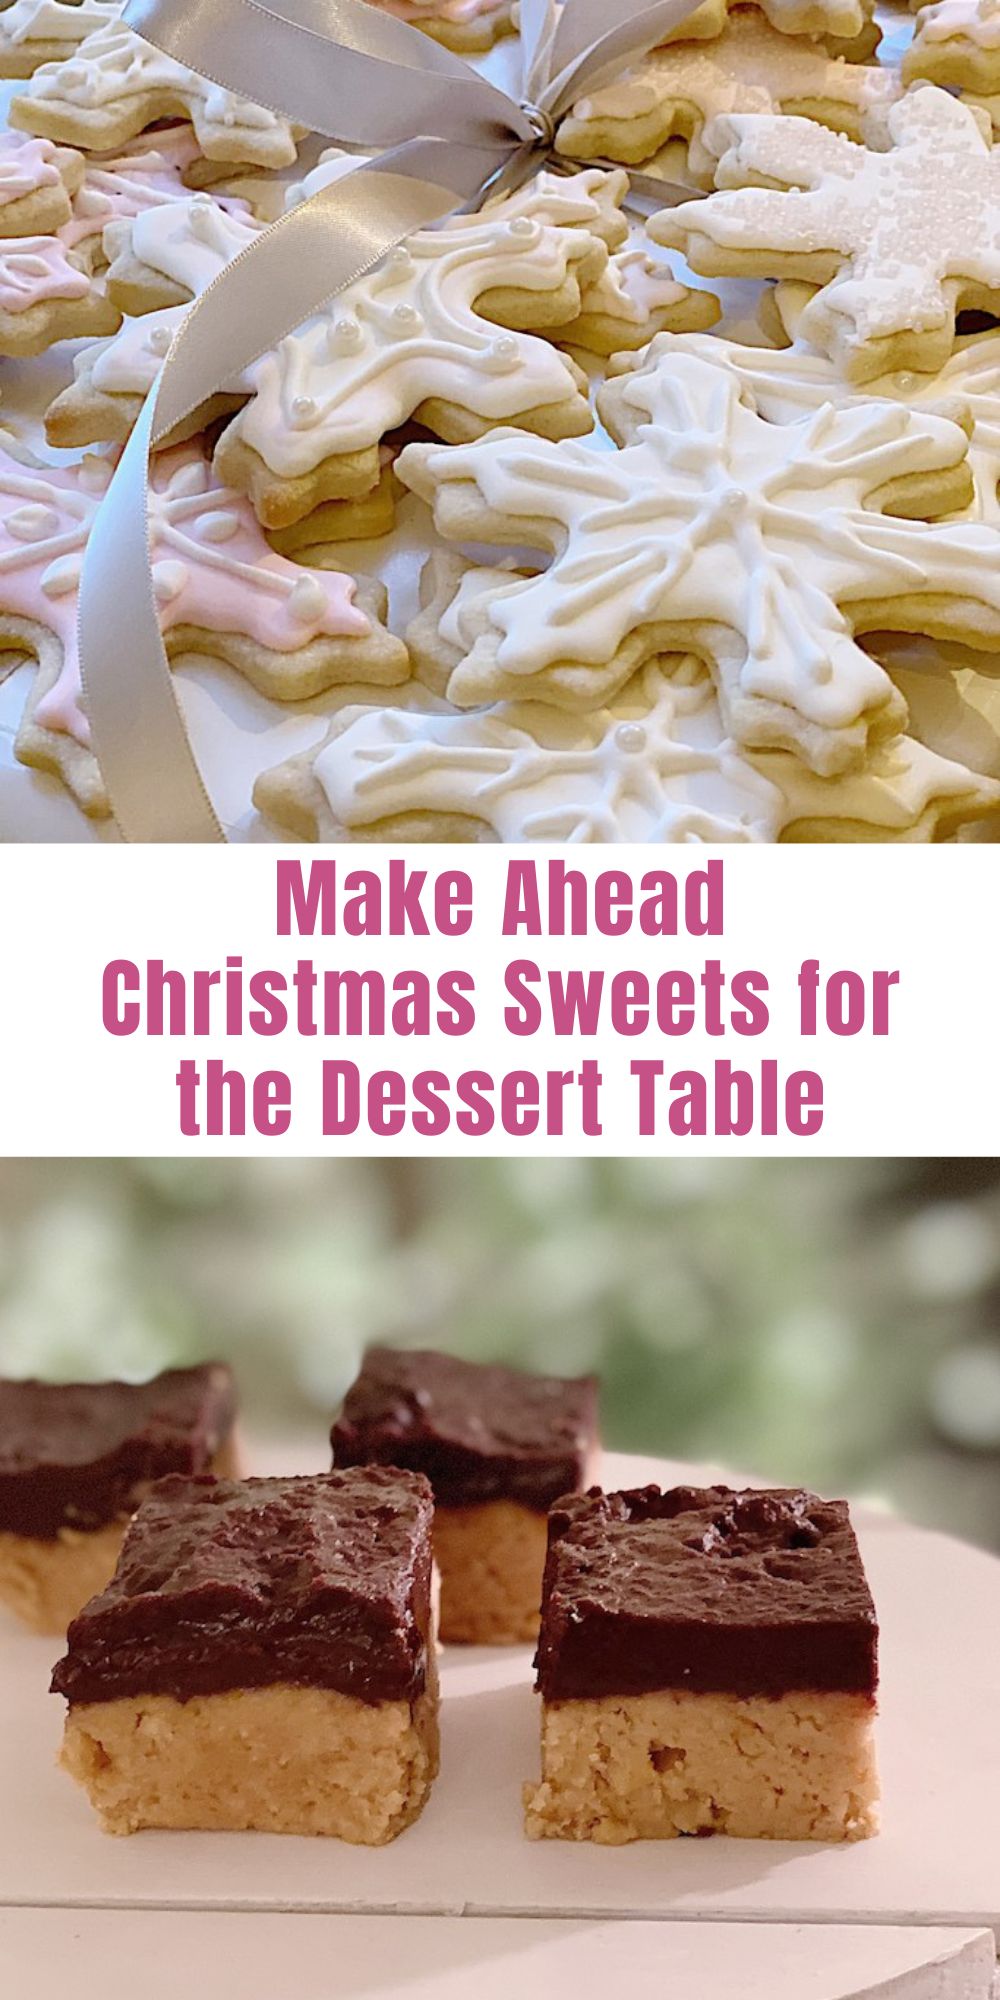 It’s Day Nine of Twelve Days to Get Ready for Christmas! Today I am sharing my favorite make ahead Christmas sweets recipes.